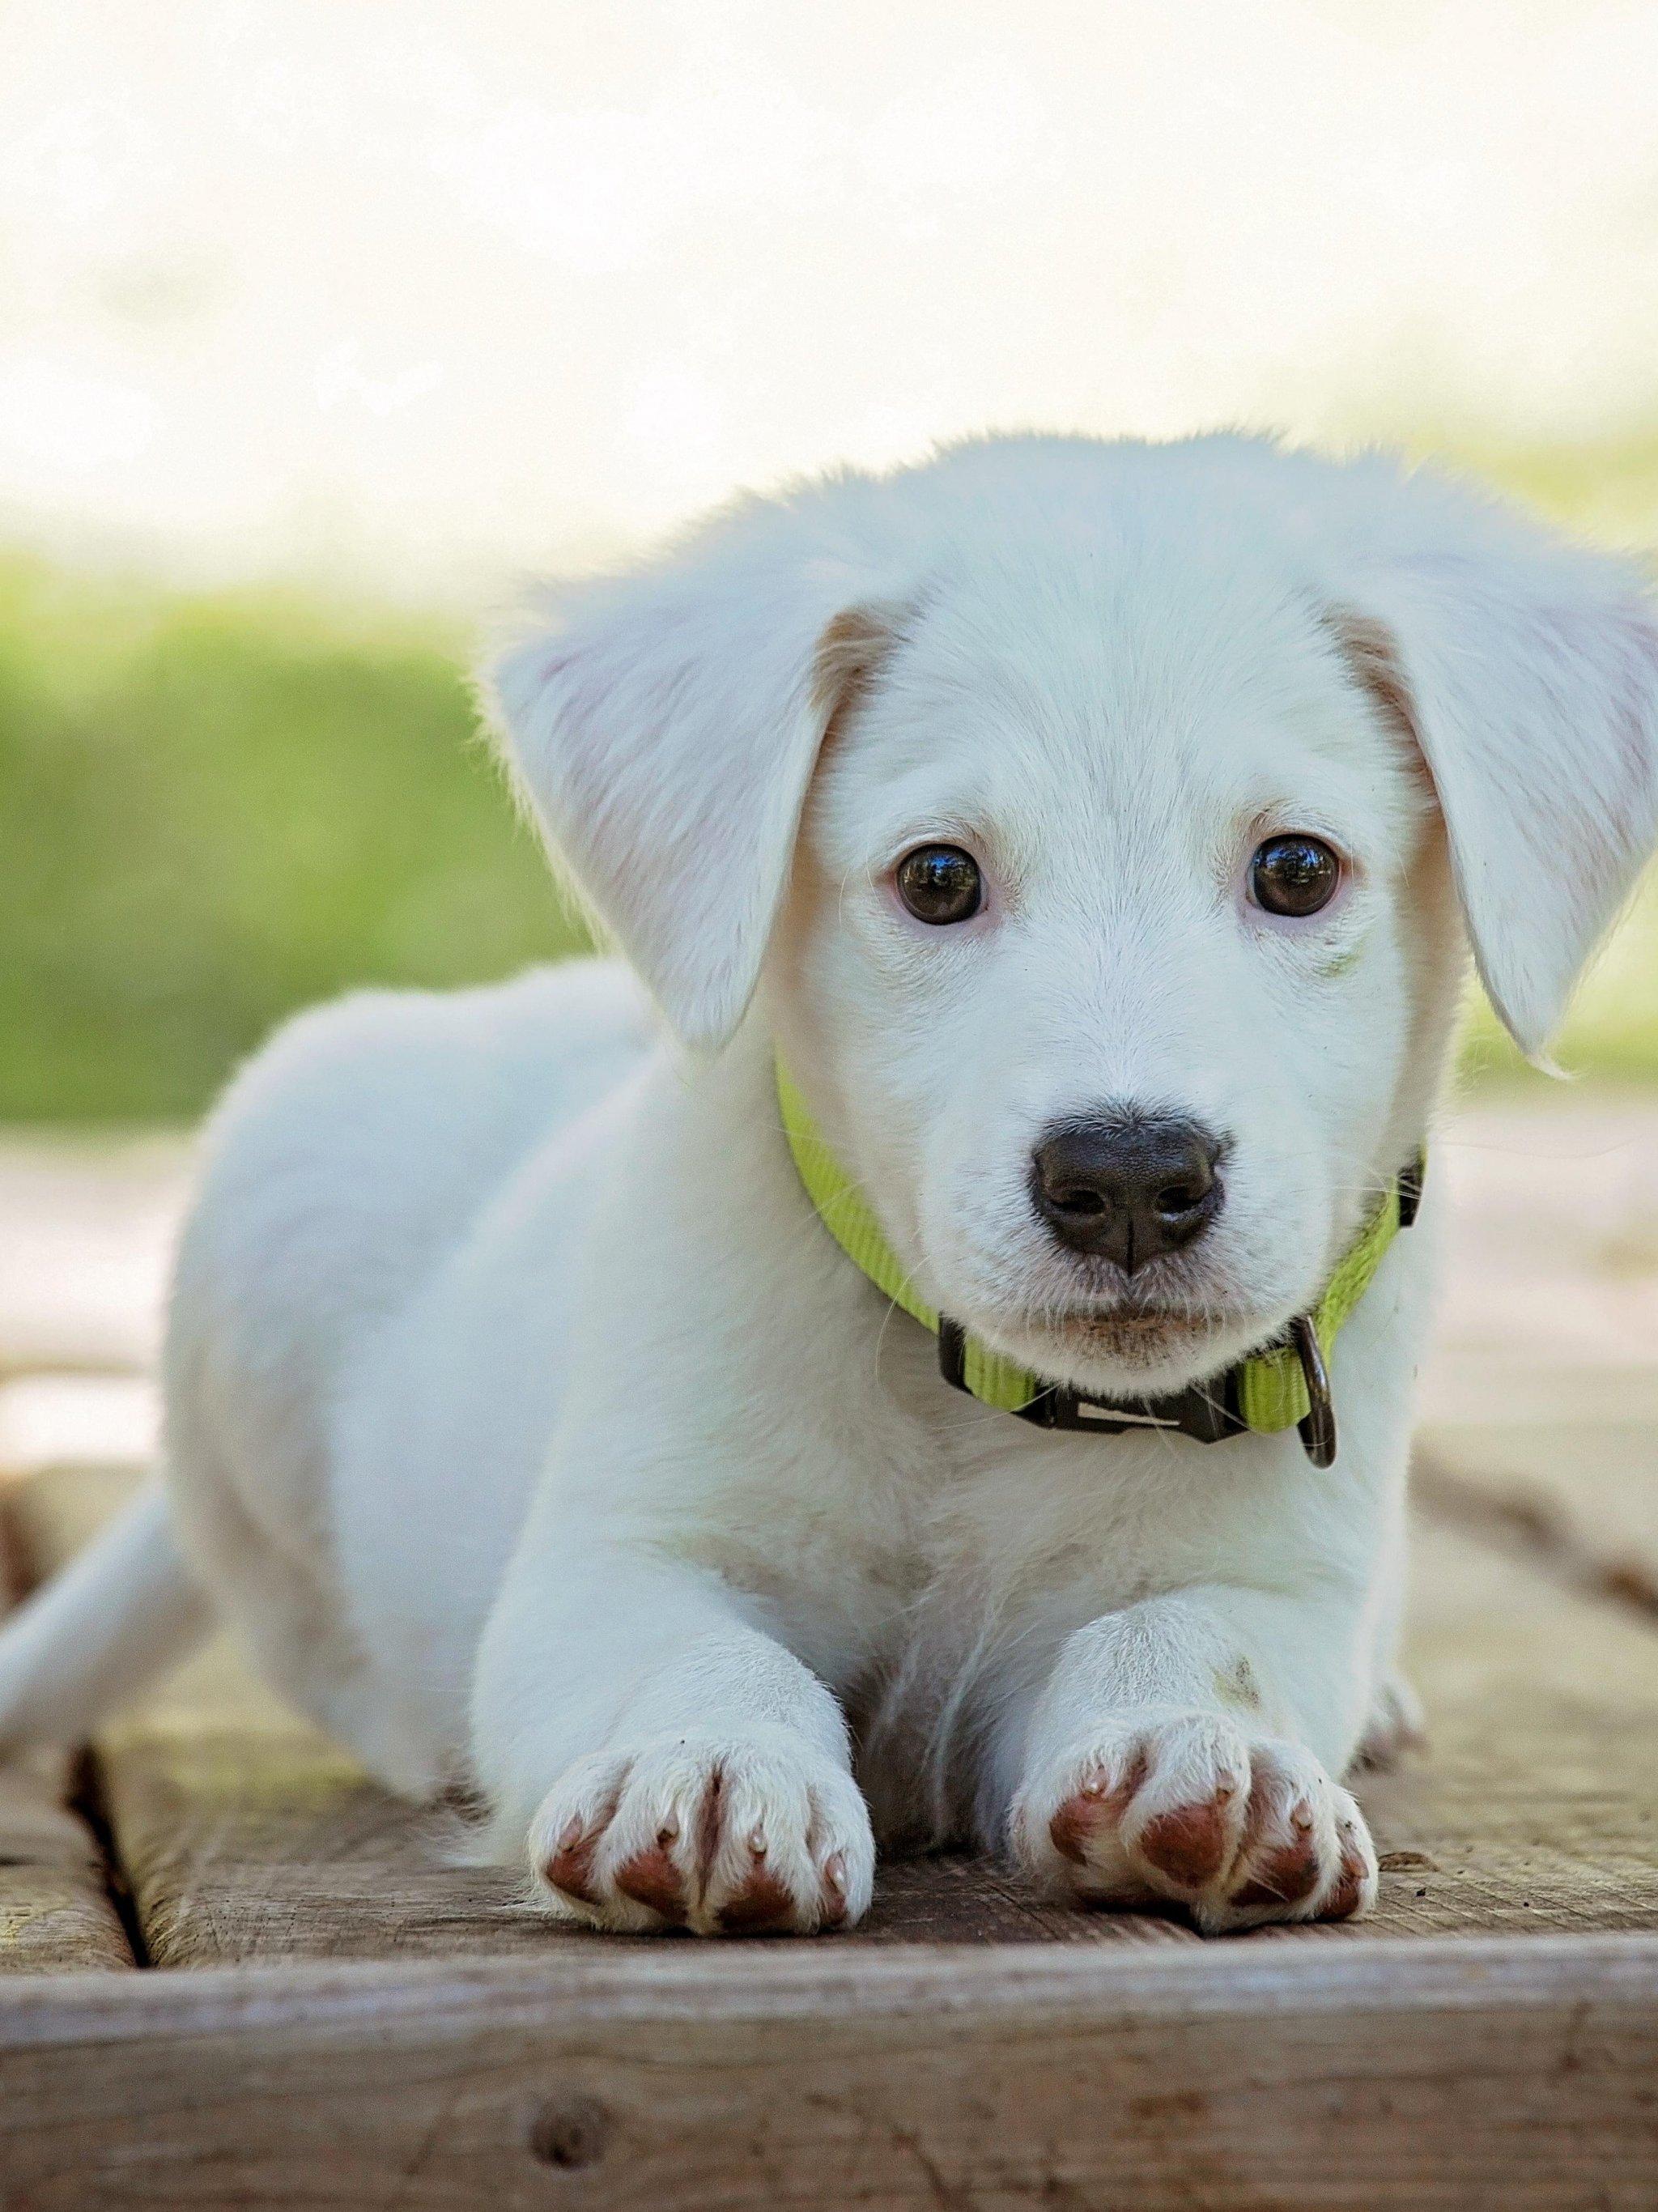 Cute Puppy Wallpaper, Android & Desktop Background